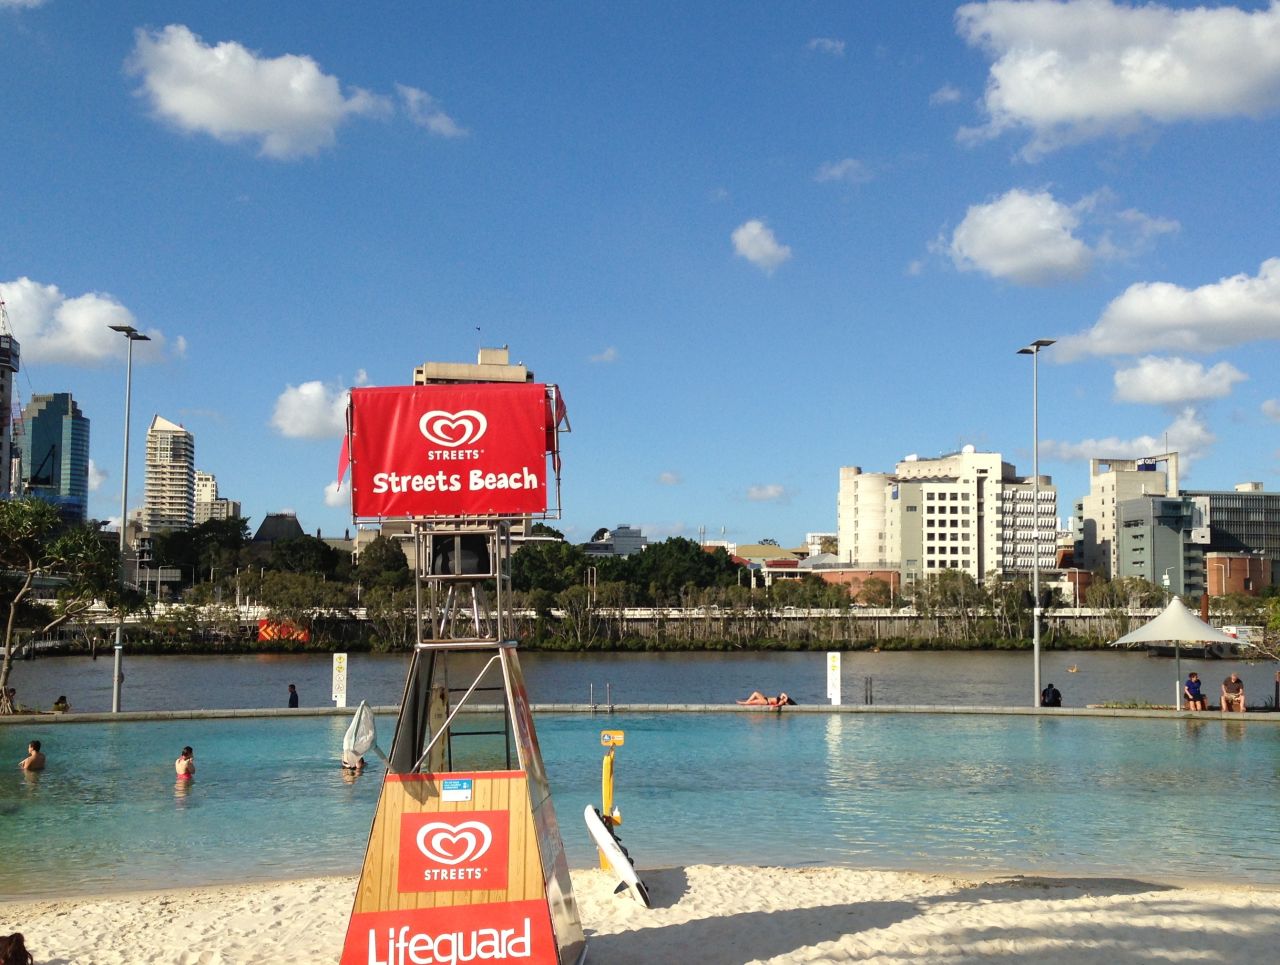 A South Bank icon, Streets Beach is a man-made lagoon surrounded by sandy beaches and palms.